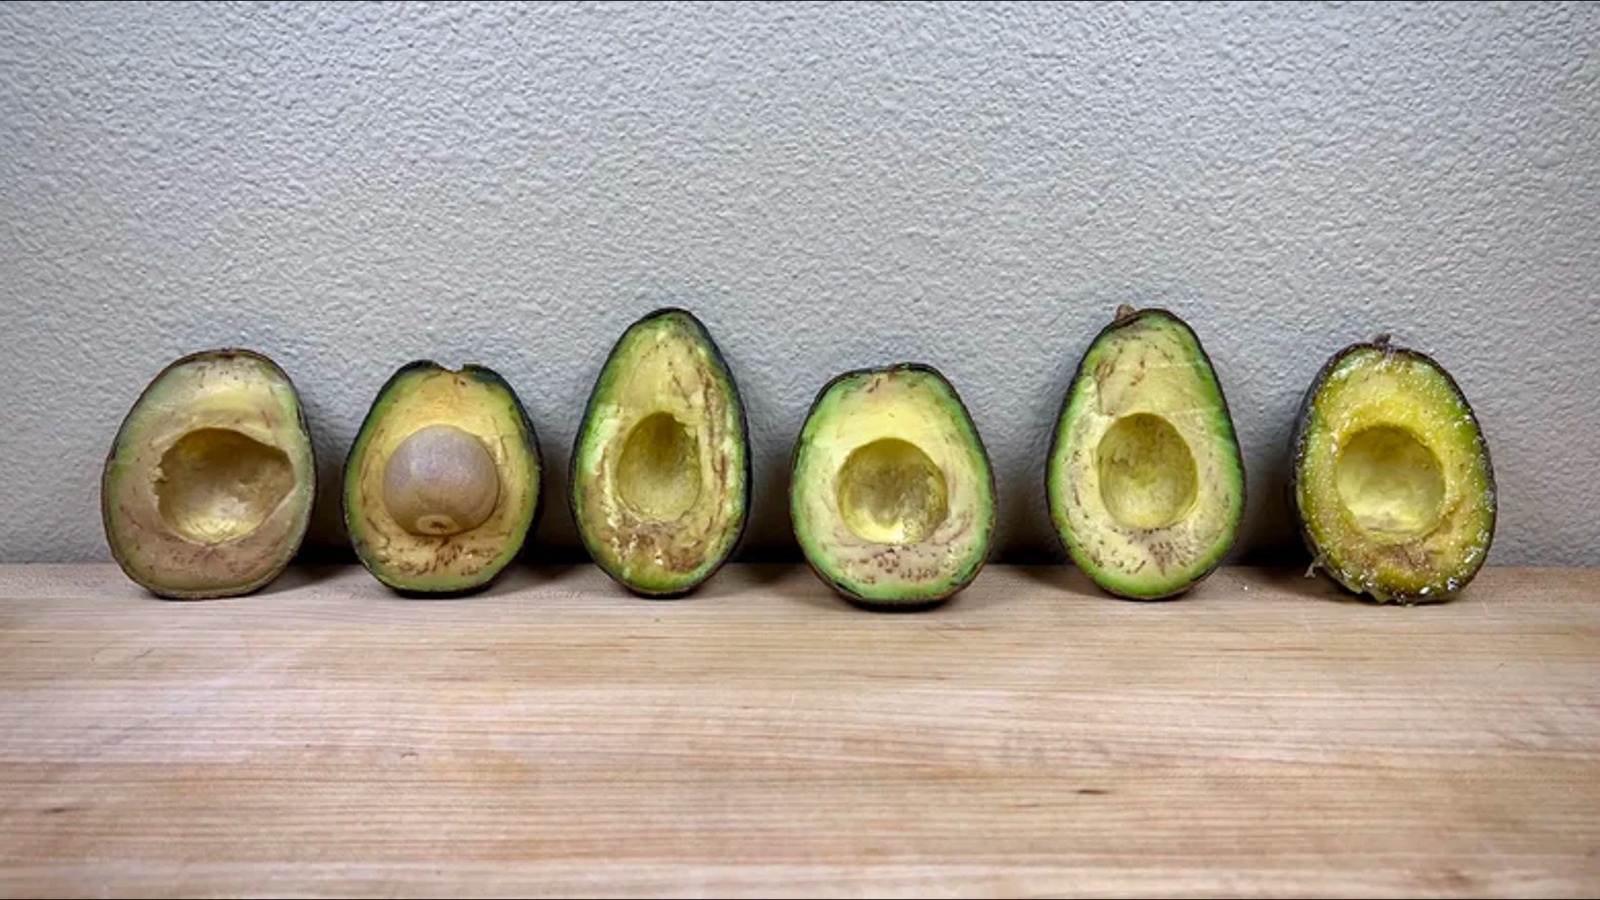 I Tried and Ranked Hacks for Storing Cut Avocados in the Refrigerator